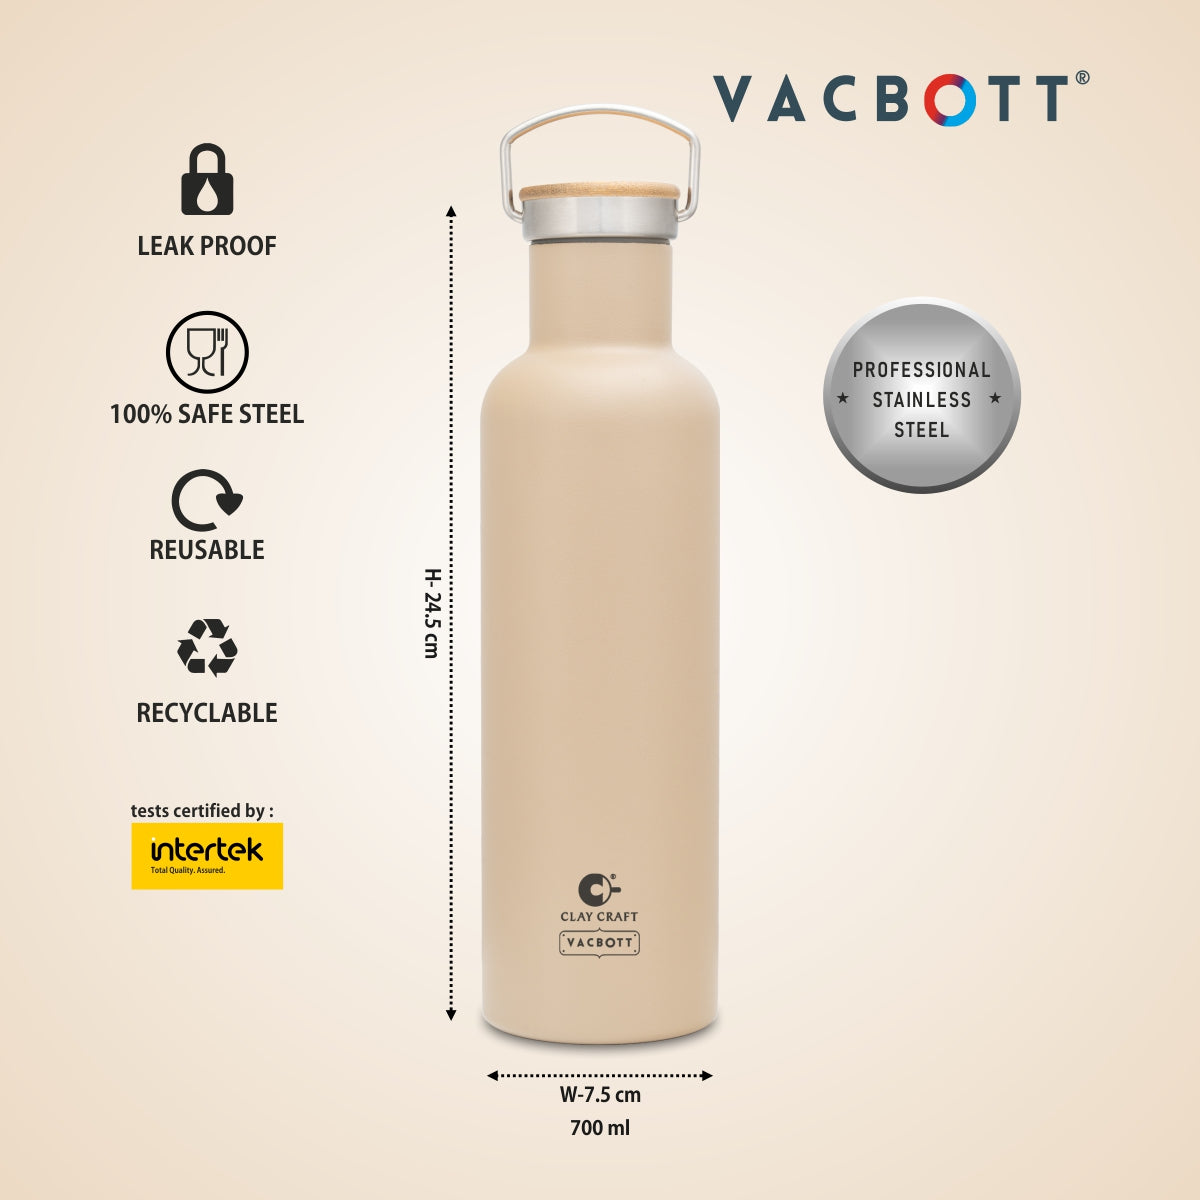 Vacbott Hiker Combo Set Double Walled 24 Hours Hot and Cold Water Bottle, 700ml, with Single Walled VIctor Mug (2 Pcs)